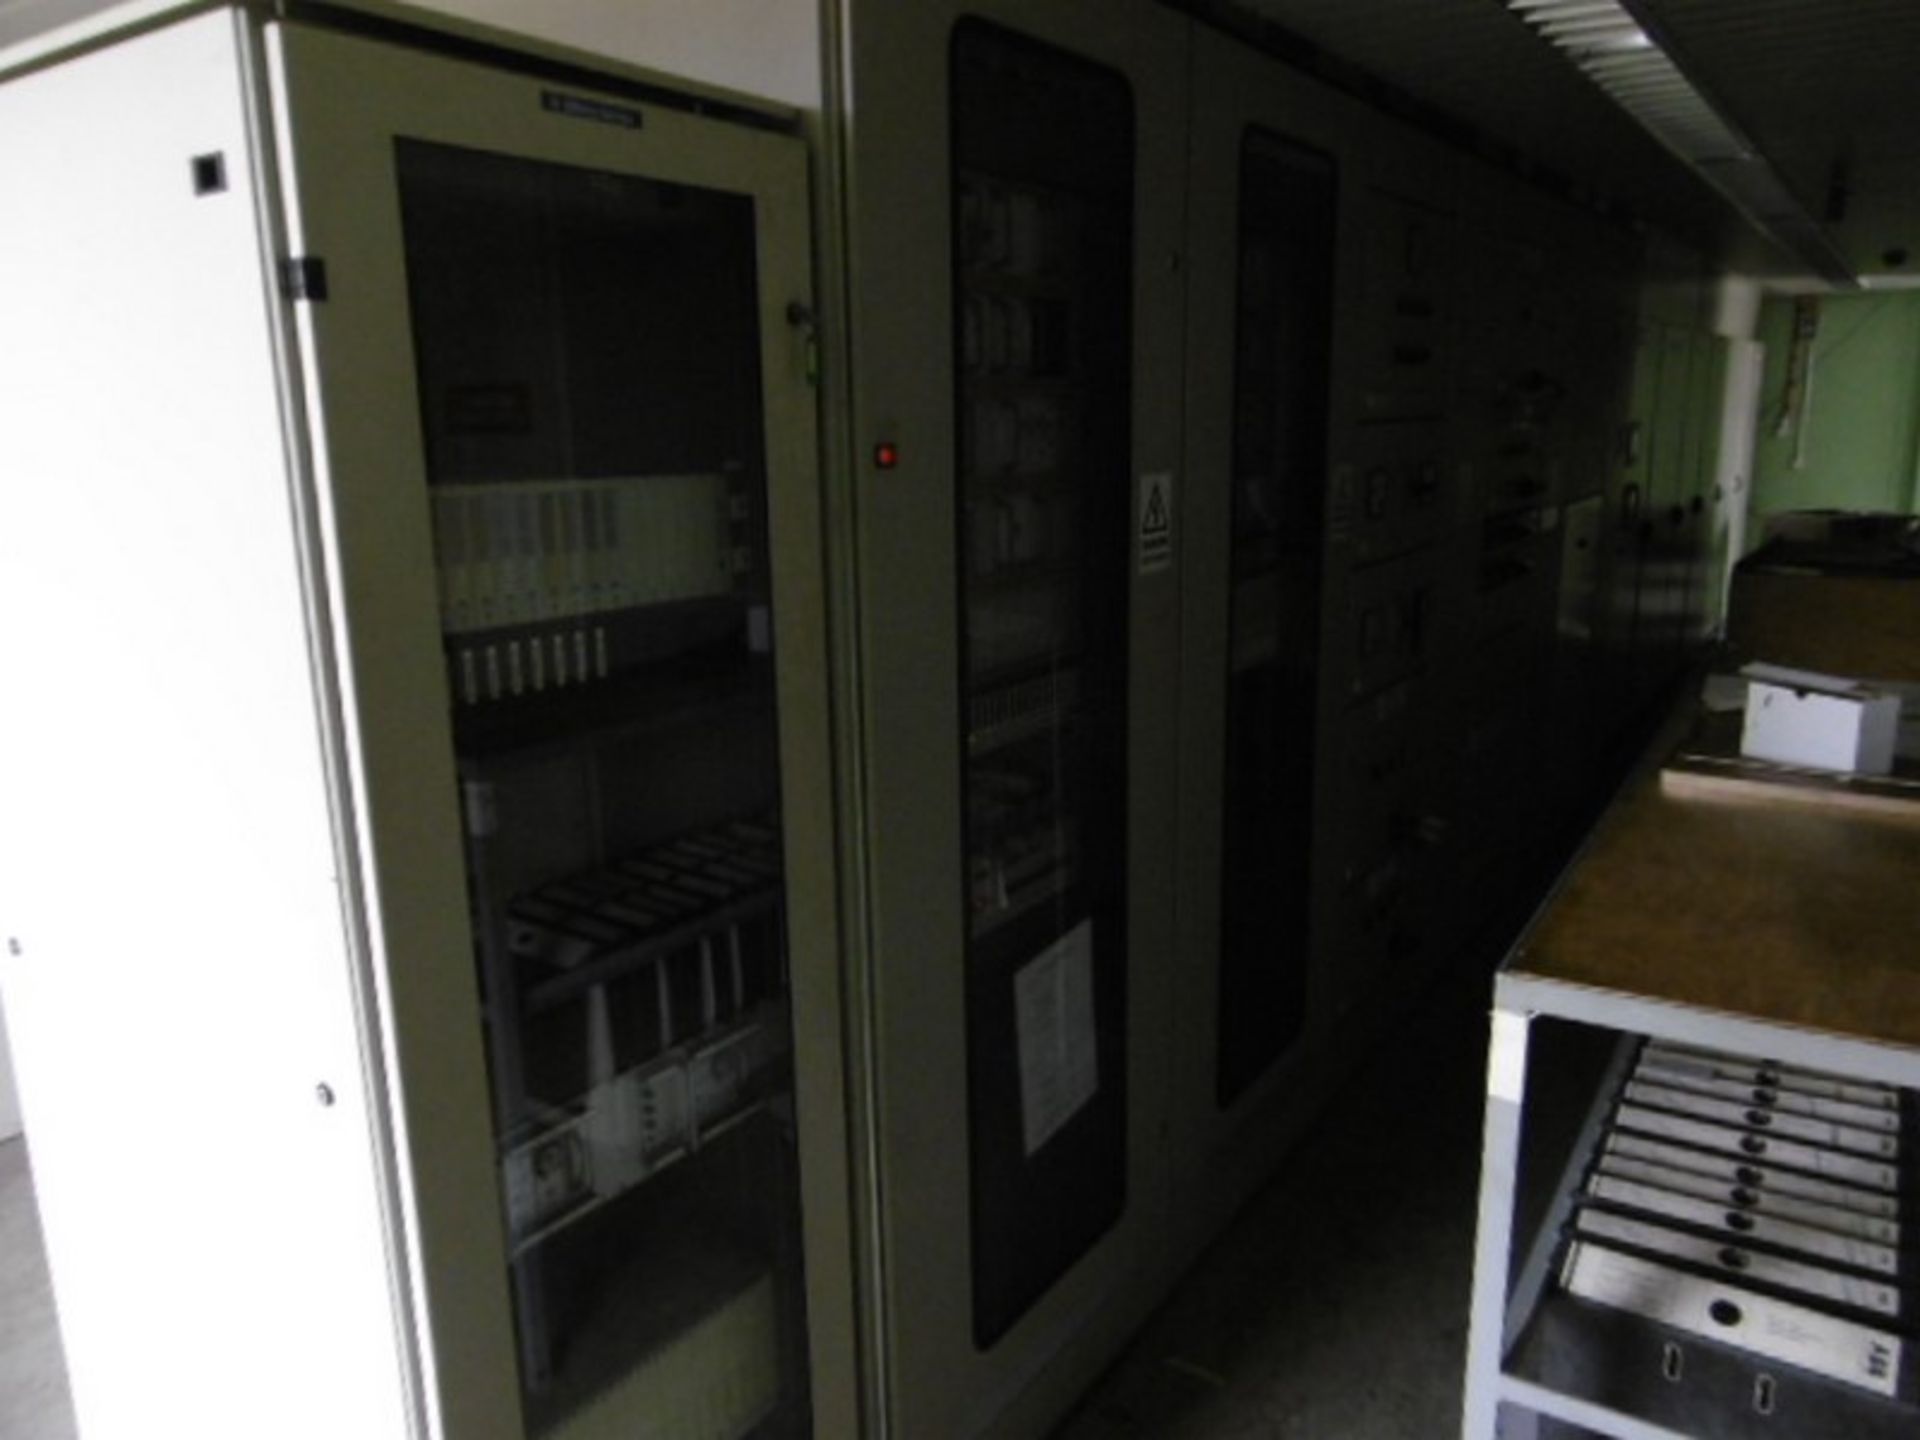 Large Qty Switchgear - From Gas Turbine 1 Control Module Building - Image 3 of 33